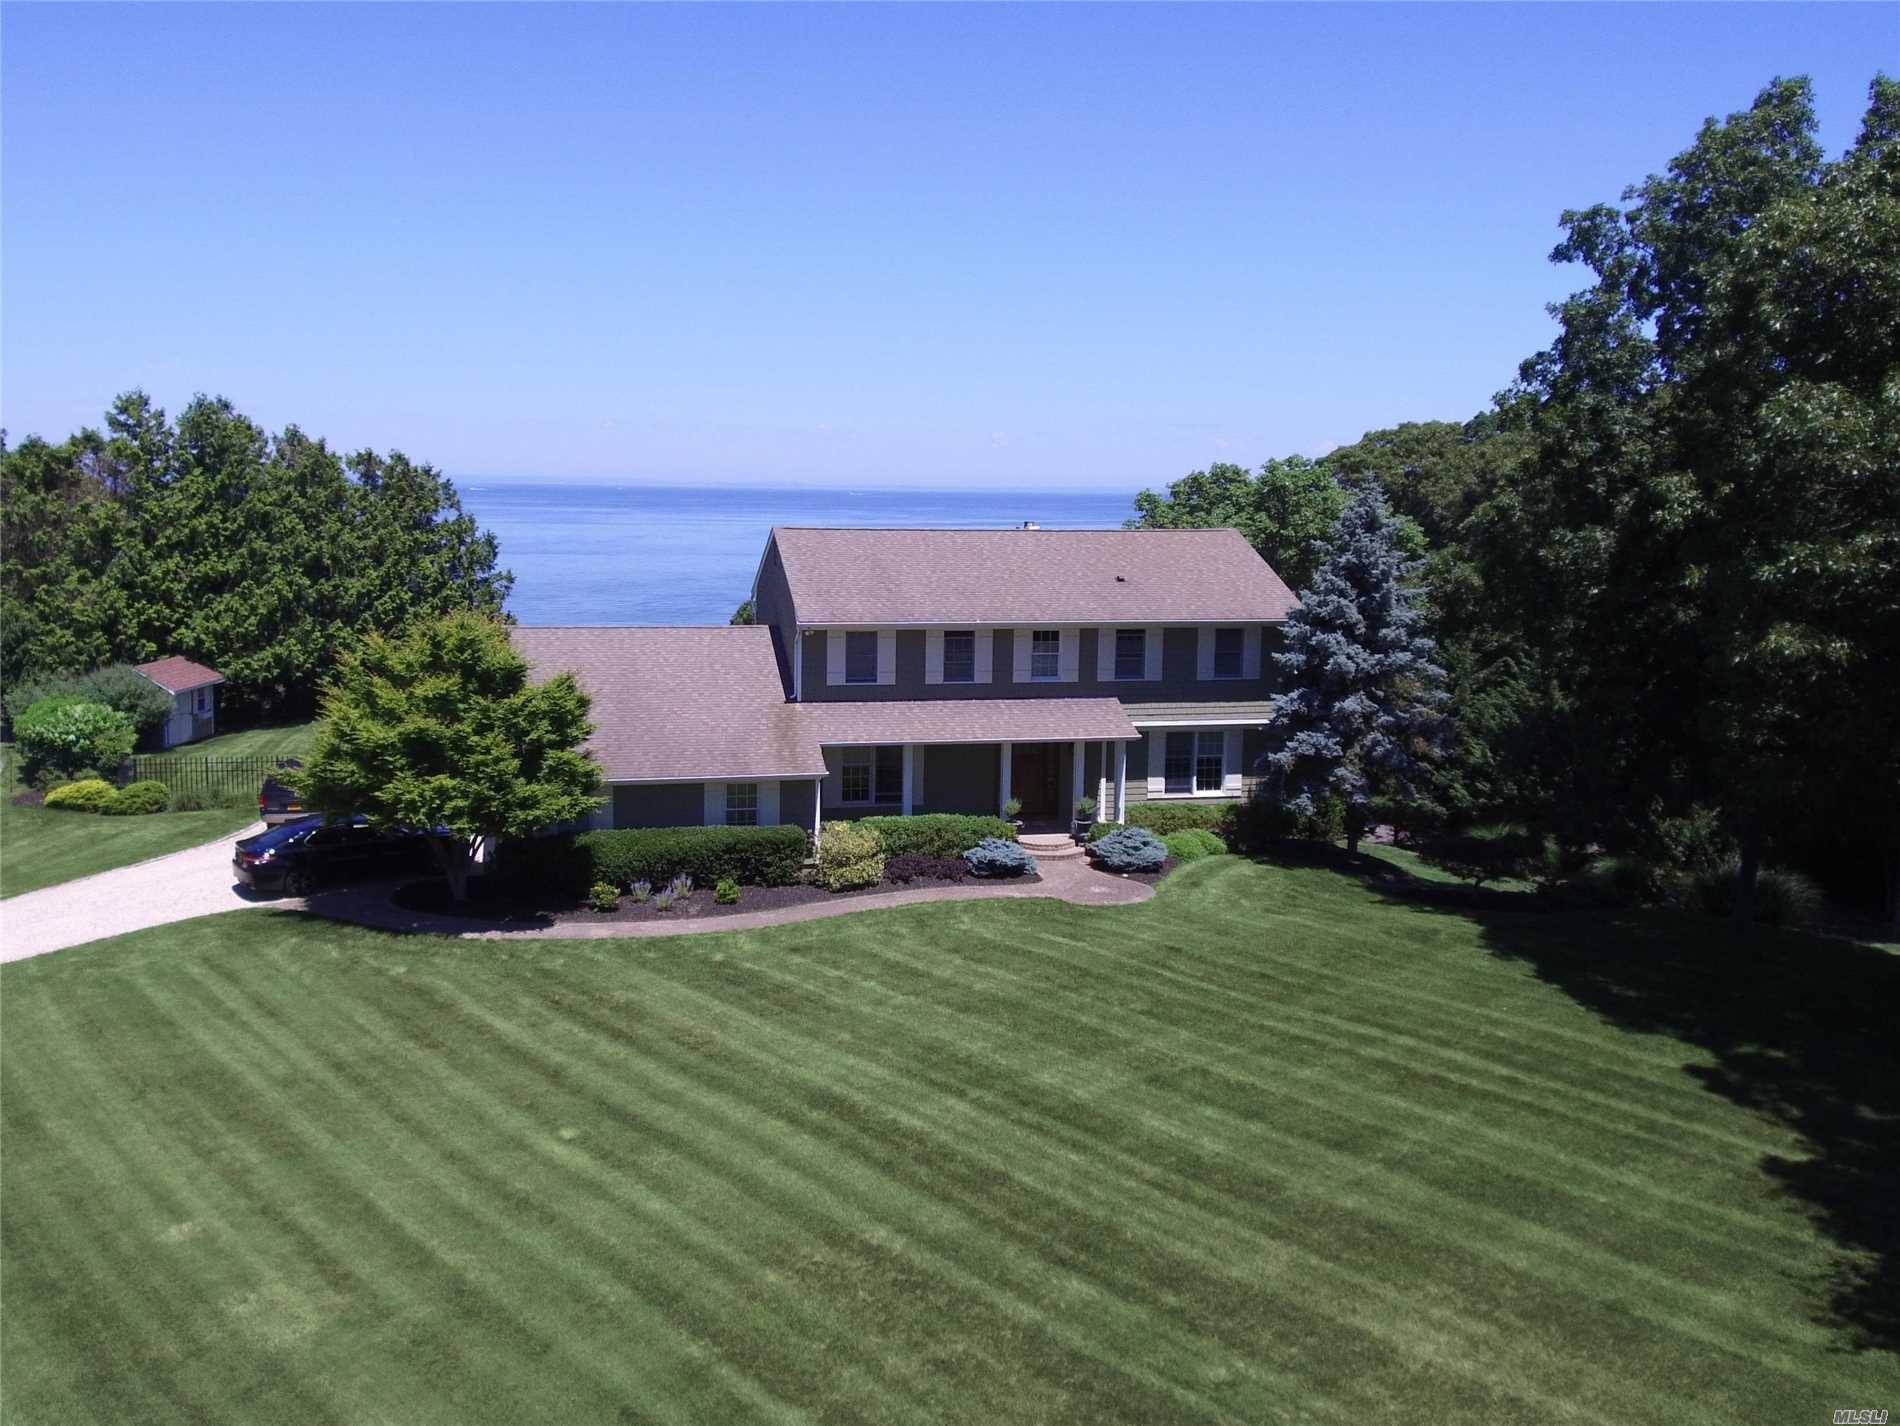 Stunning Waterfront 4 Bedroom 3 1/2 Bath Colonial On 1 Acre In Soundview Acres.